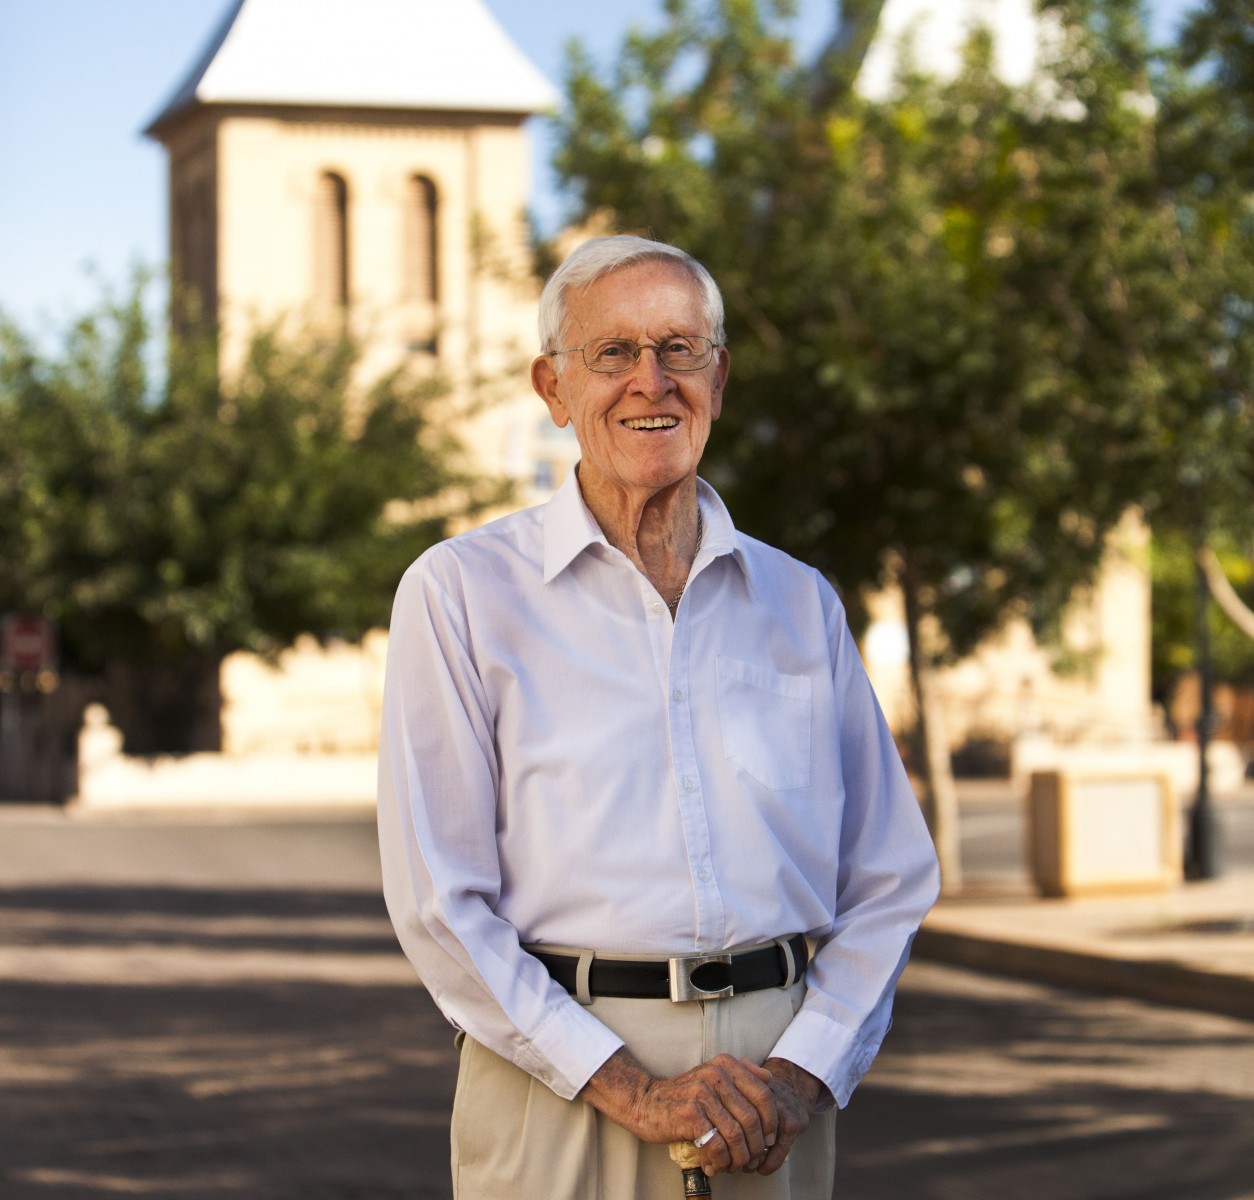 J. Paul Taylor photographed on the Mesilla Plaza. Photo courtesy of Paul Ratje. Photo copyrighted to Paul Ratje.